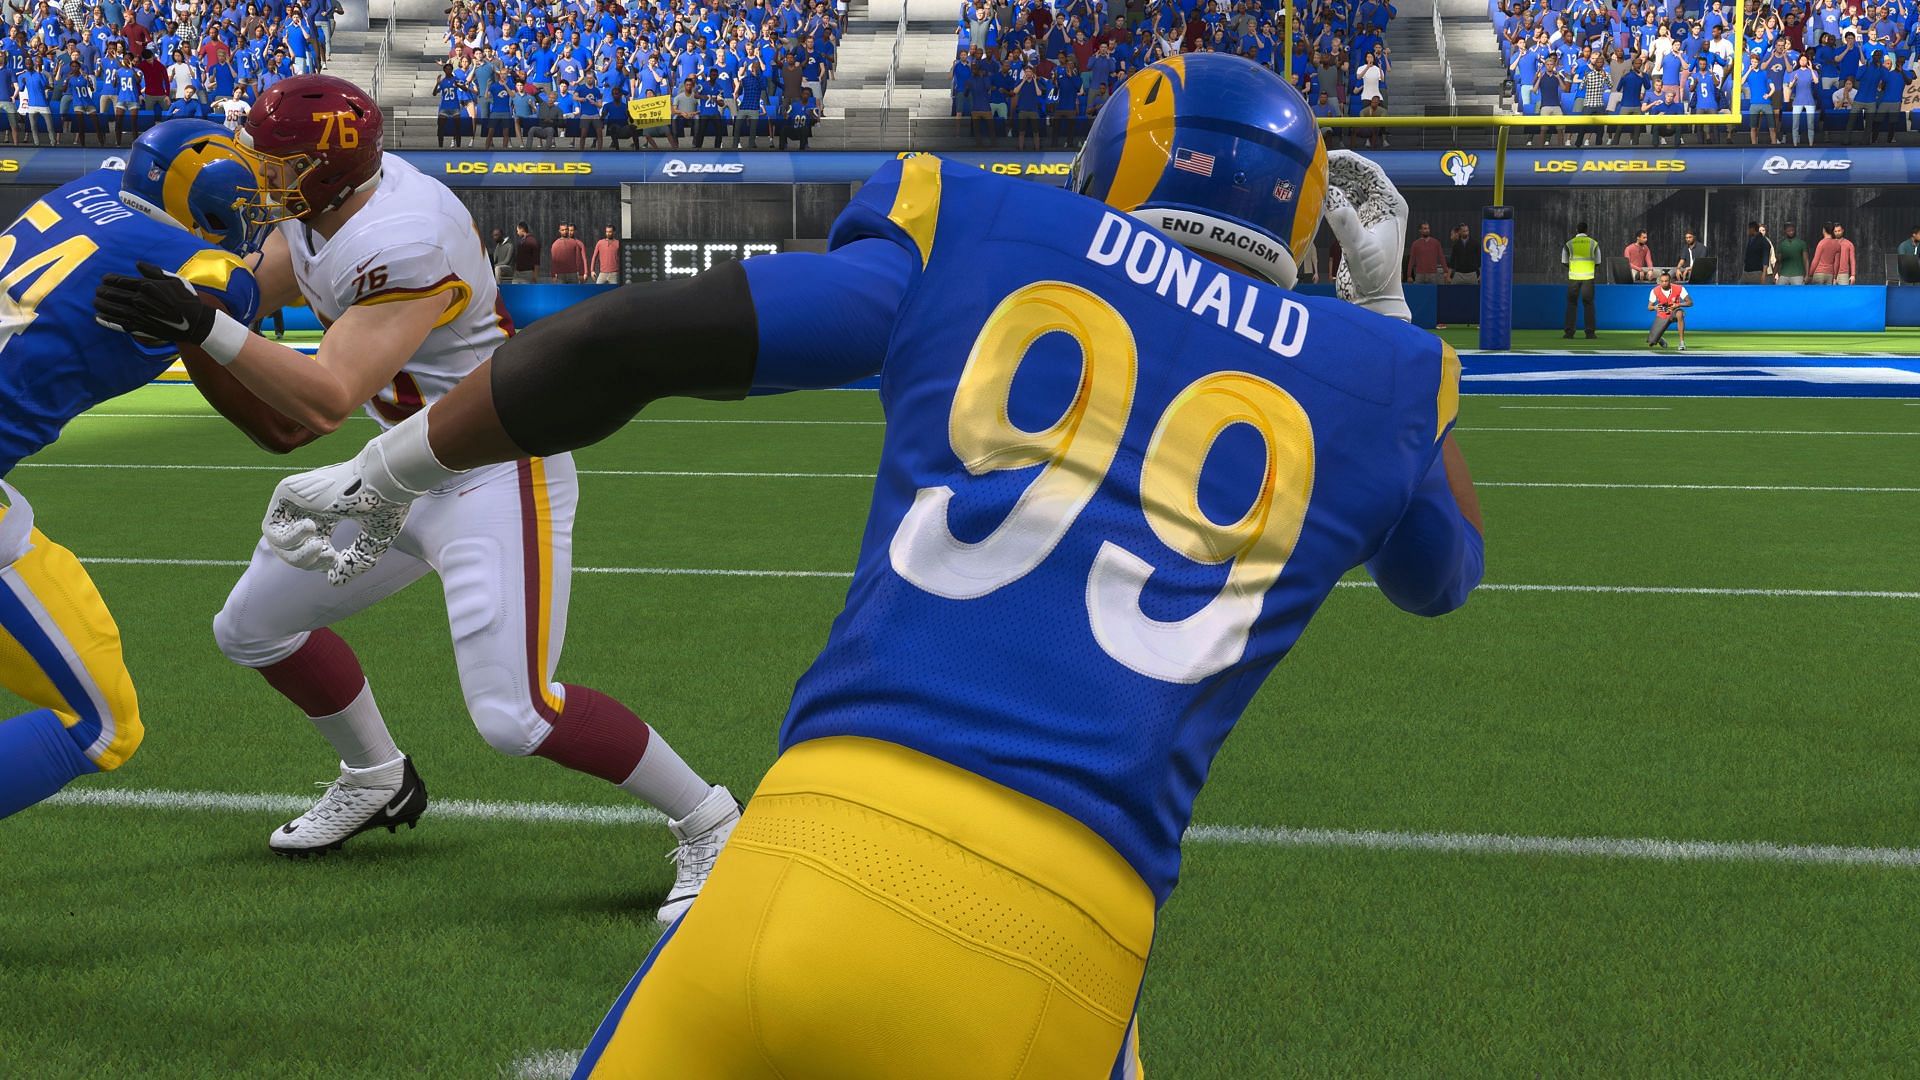 Aaron Donald is one of only a handful of 99-rated players